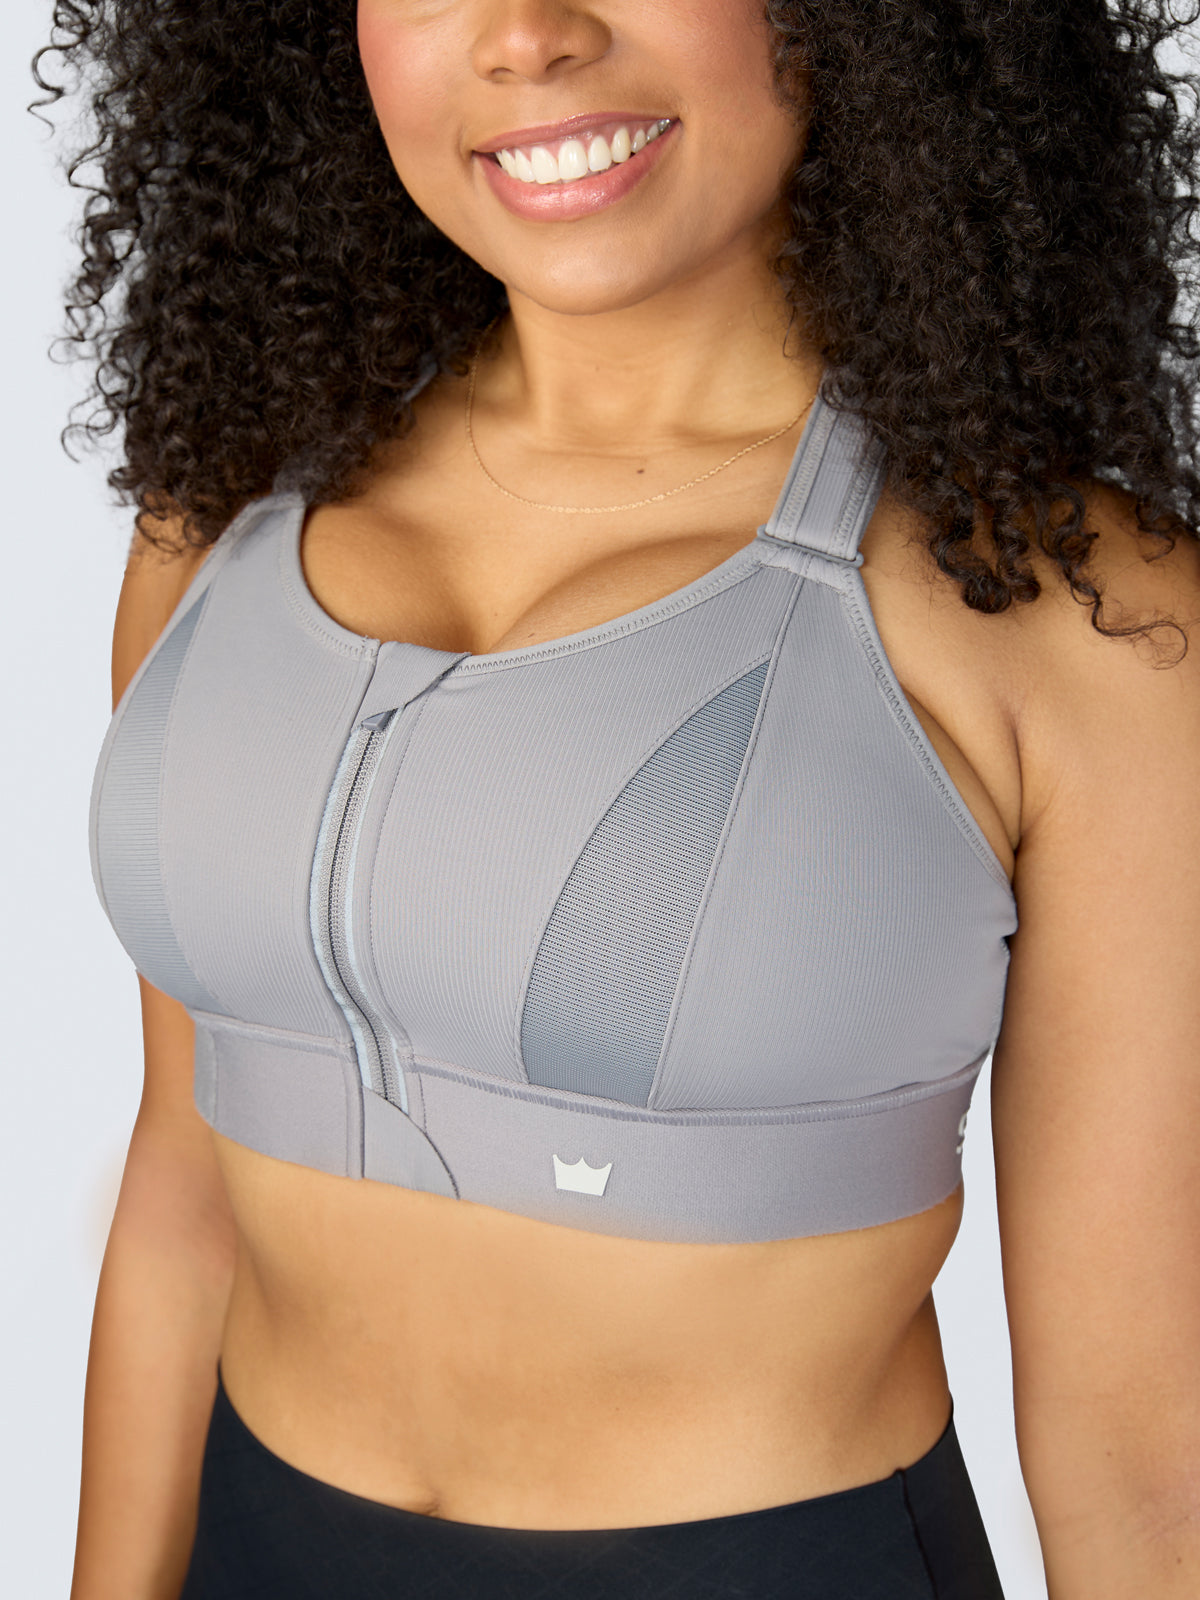 ADJUSTABLE SPORTS BRA, AS SEEN ON ABC'S SHARK TANK The Shefit Ultimate Sports  Bra empowers all women regardless of age, athlet…